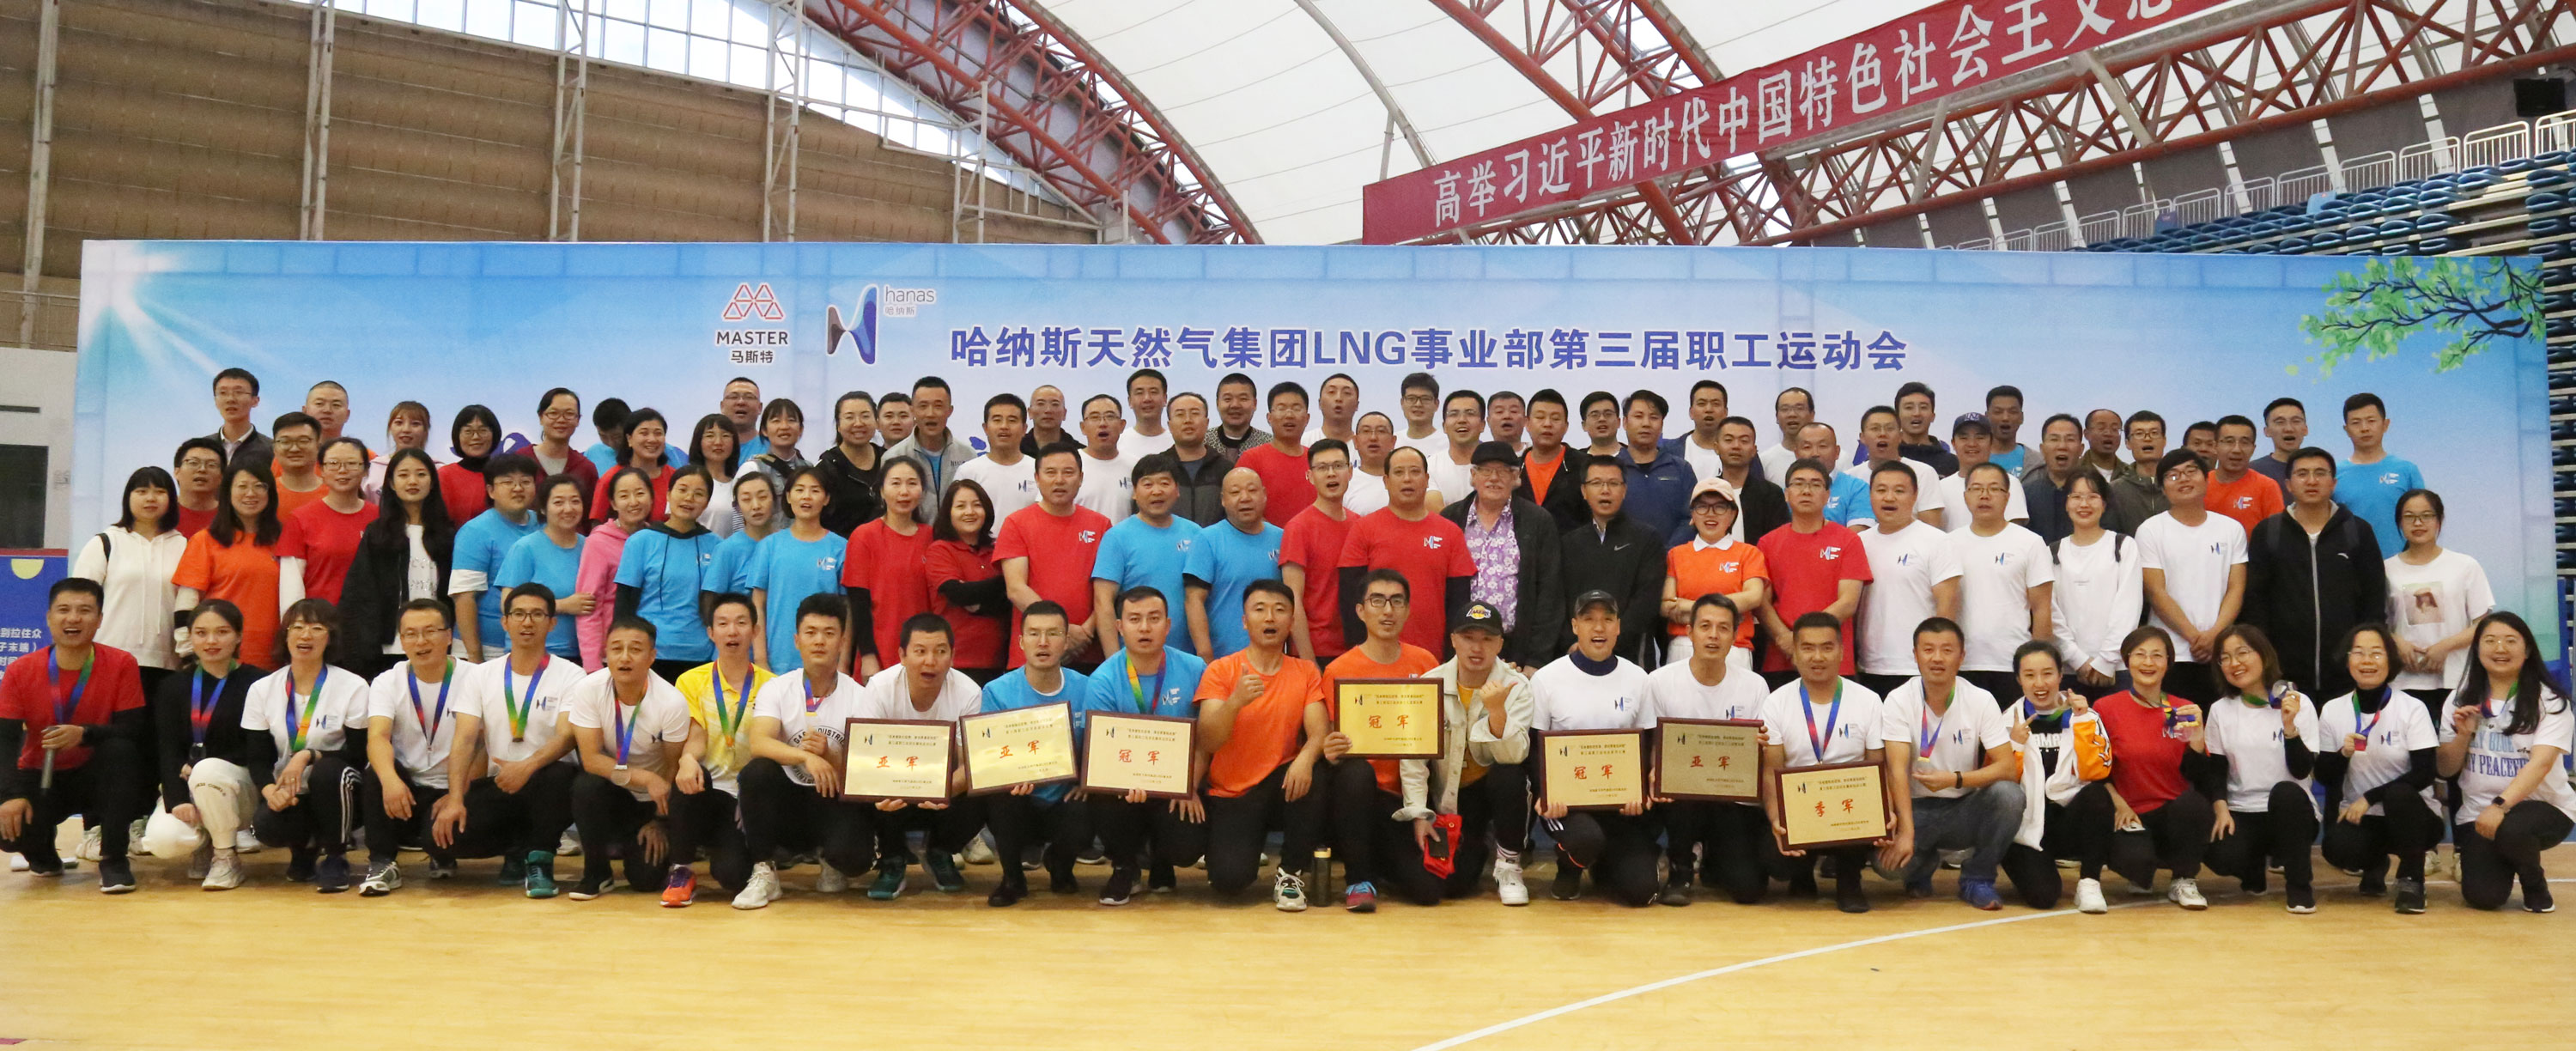 Hanas Natural Gas Group LNG Business Department successfully held “The 3rd Staff sports meeting”